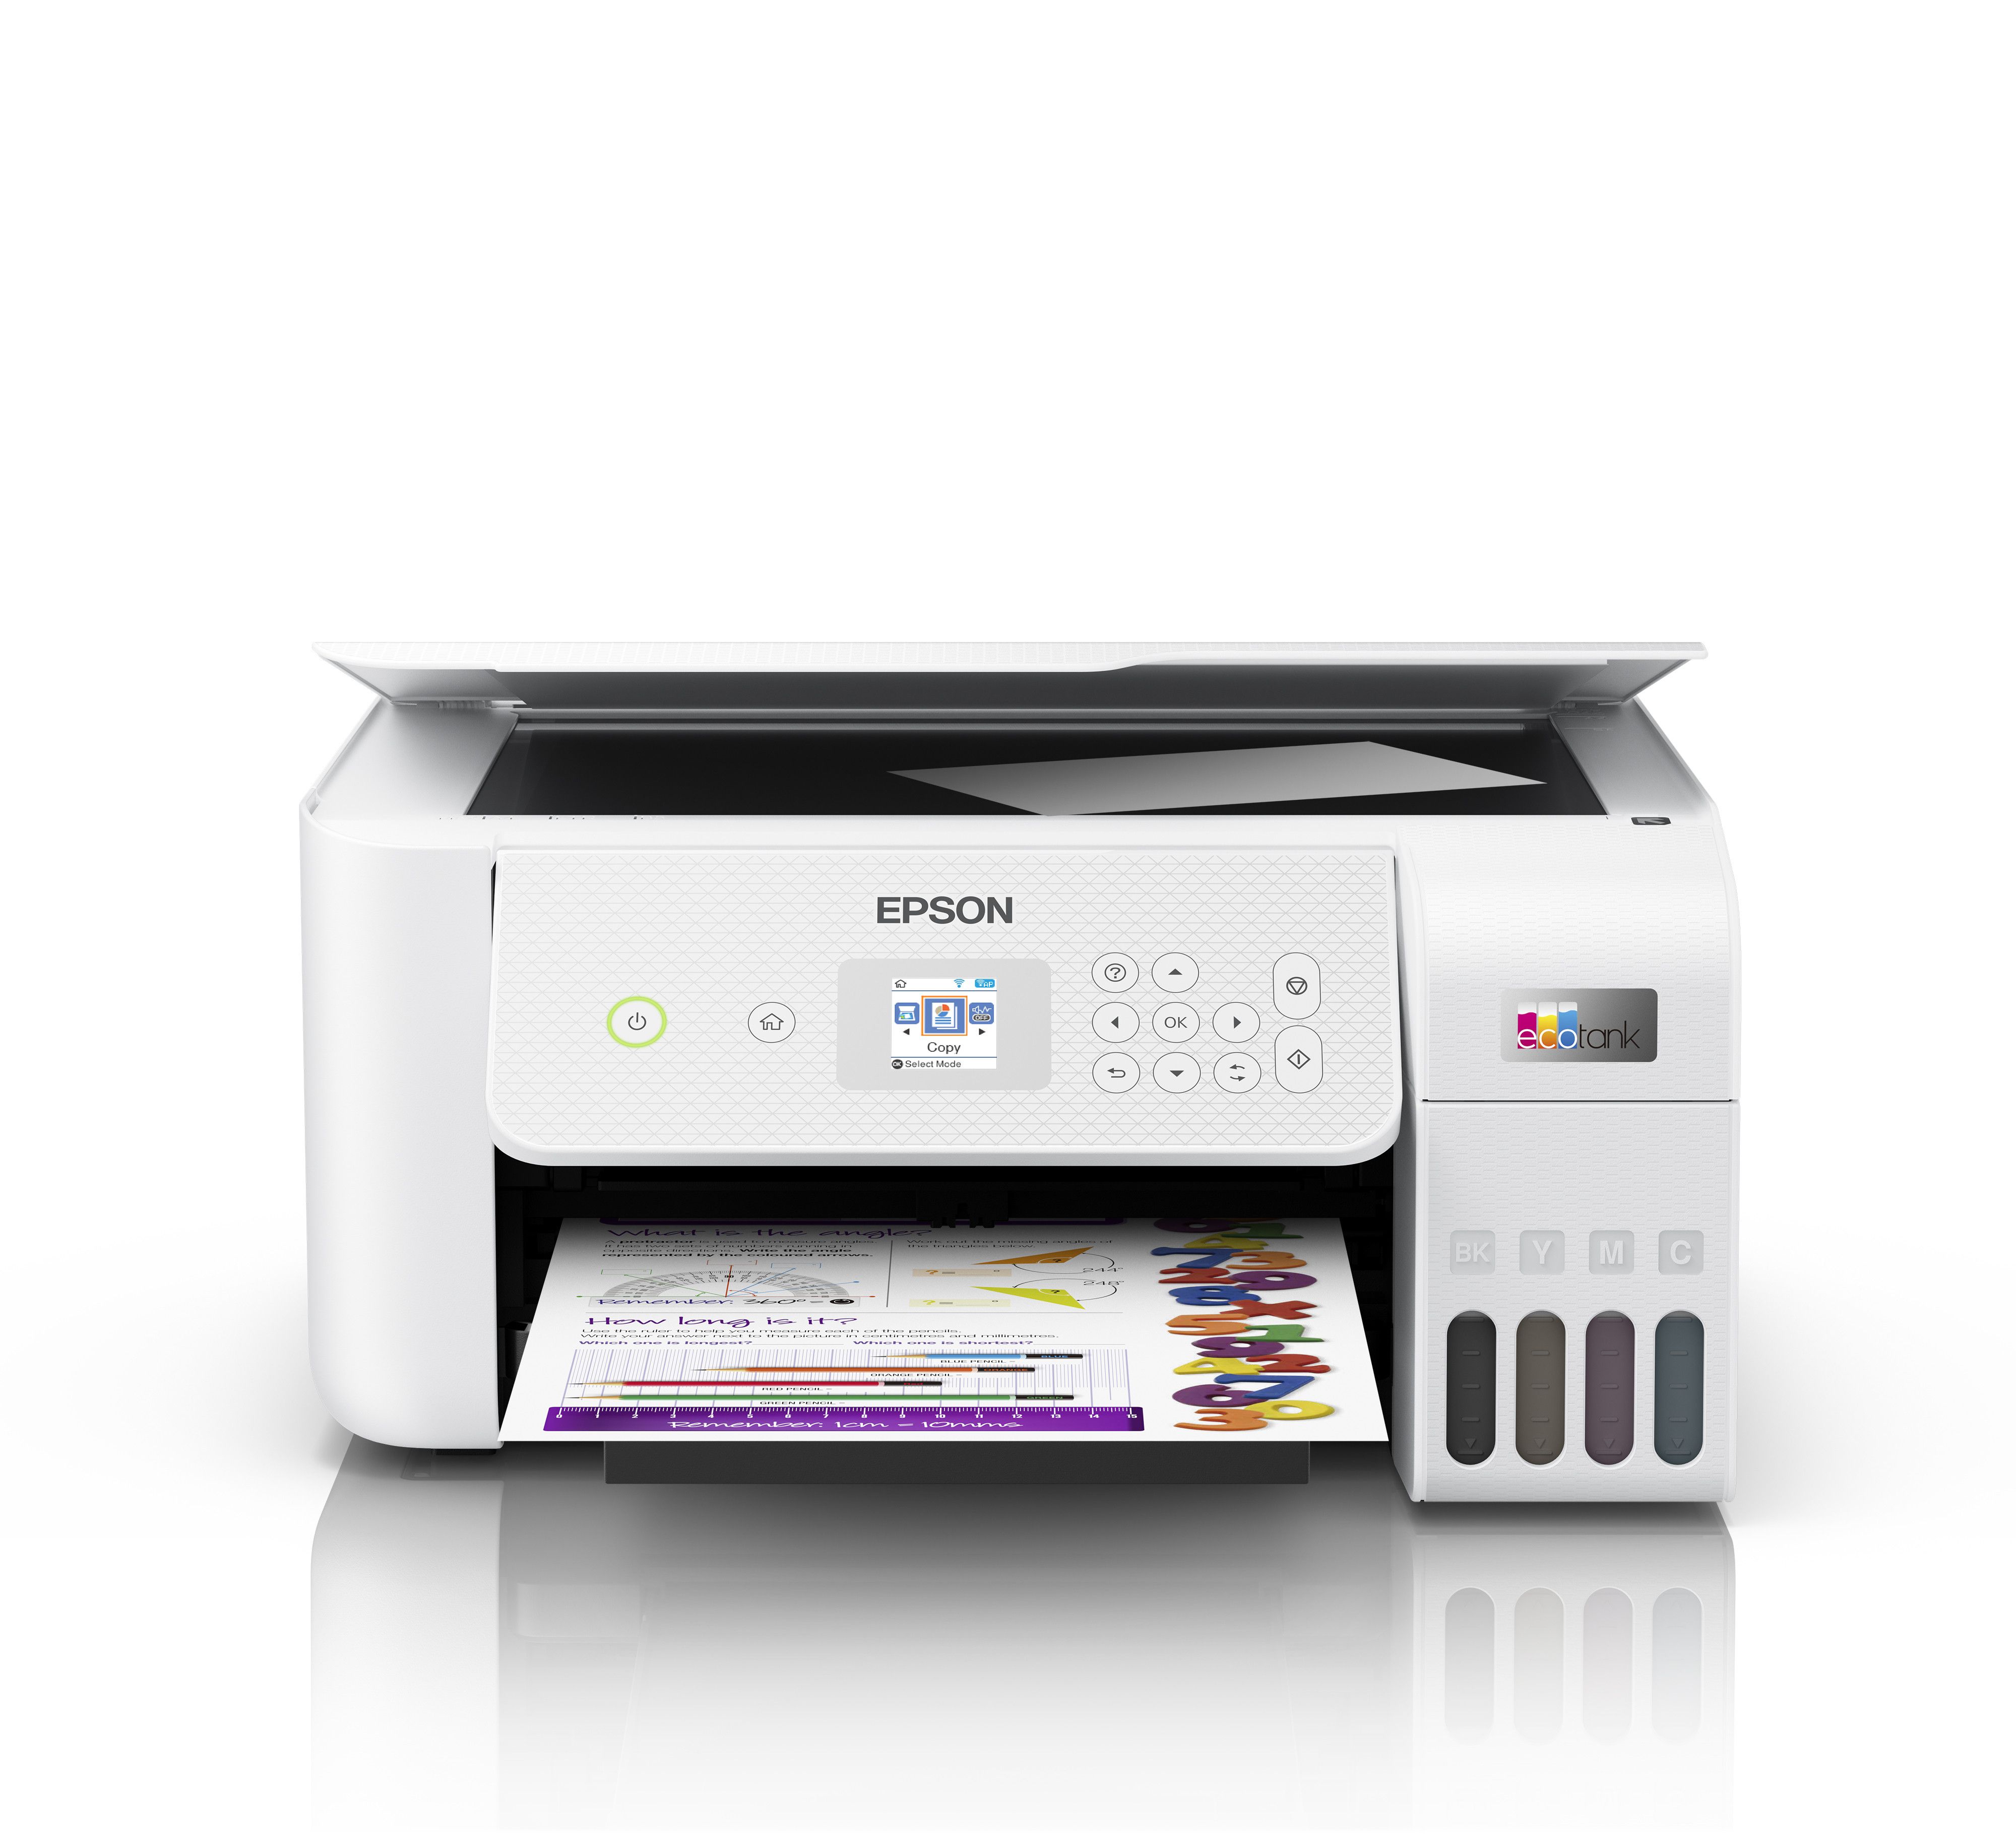 EPSON L3266 MFP ink Printer up to 10ppm_2